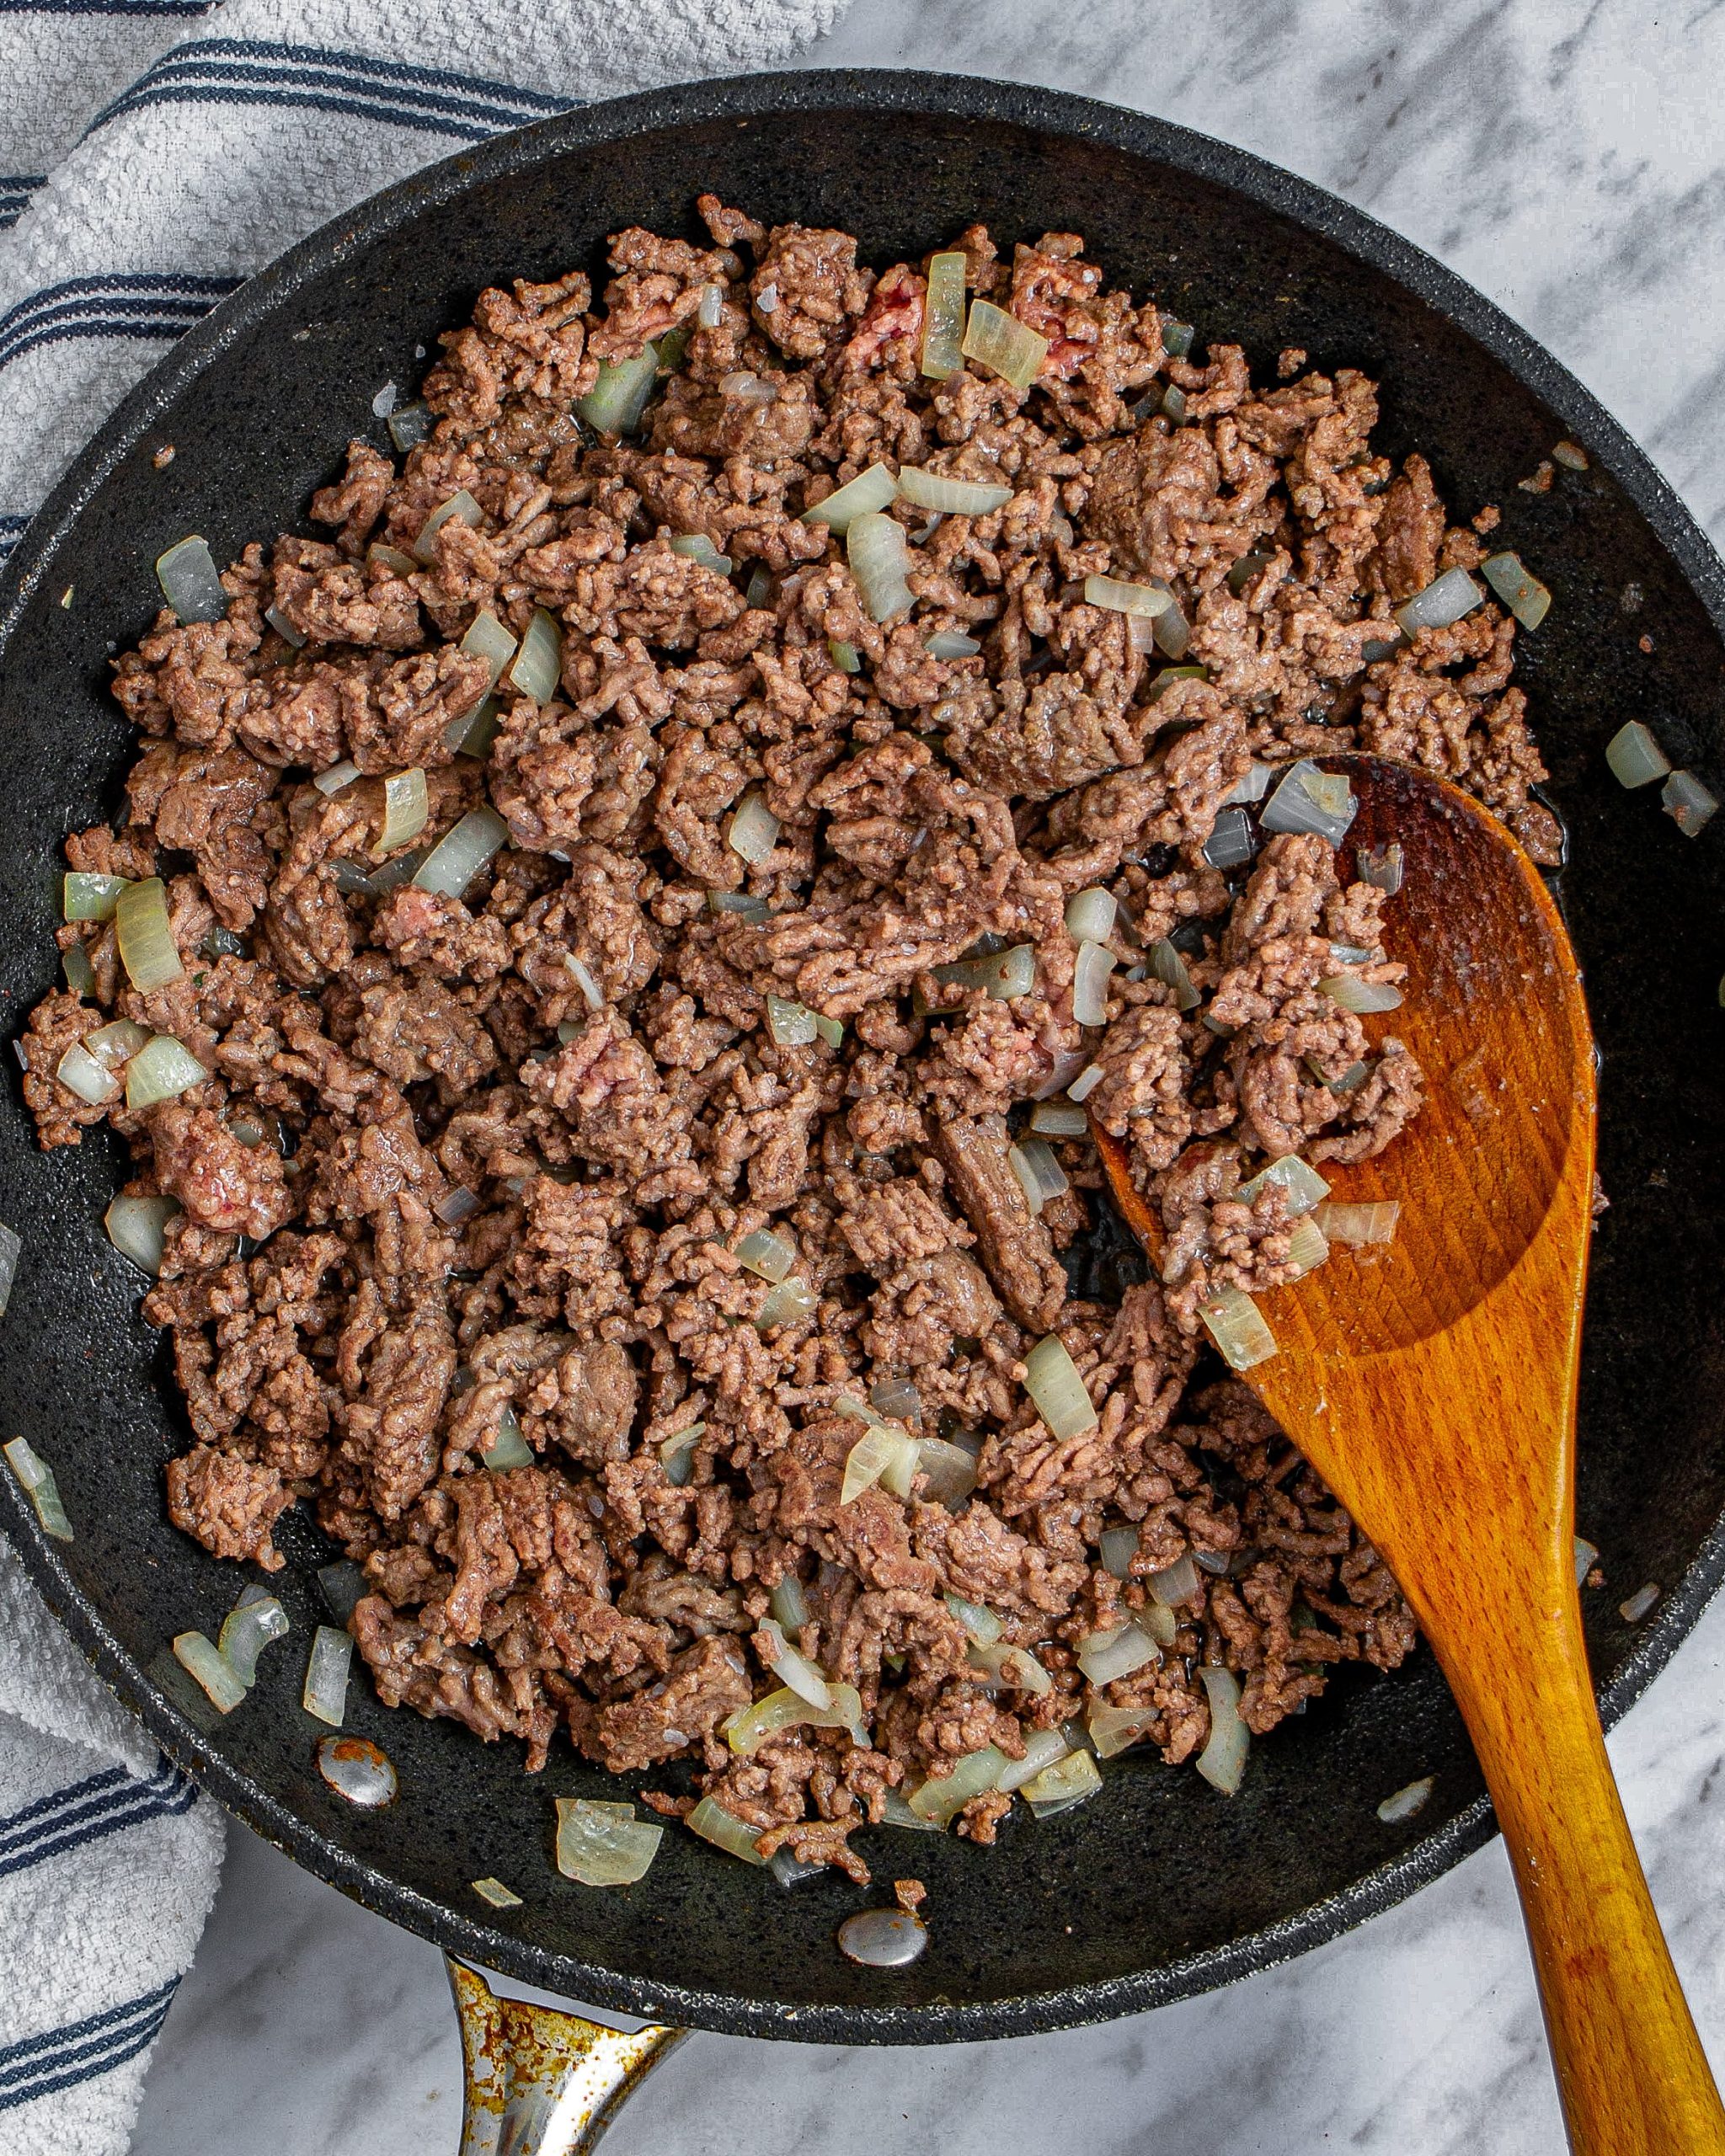 Add the ground beef and onion to the skillet and saute until the meat is completely browned and the onion has softened.